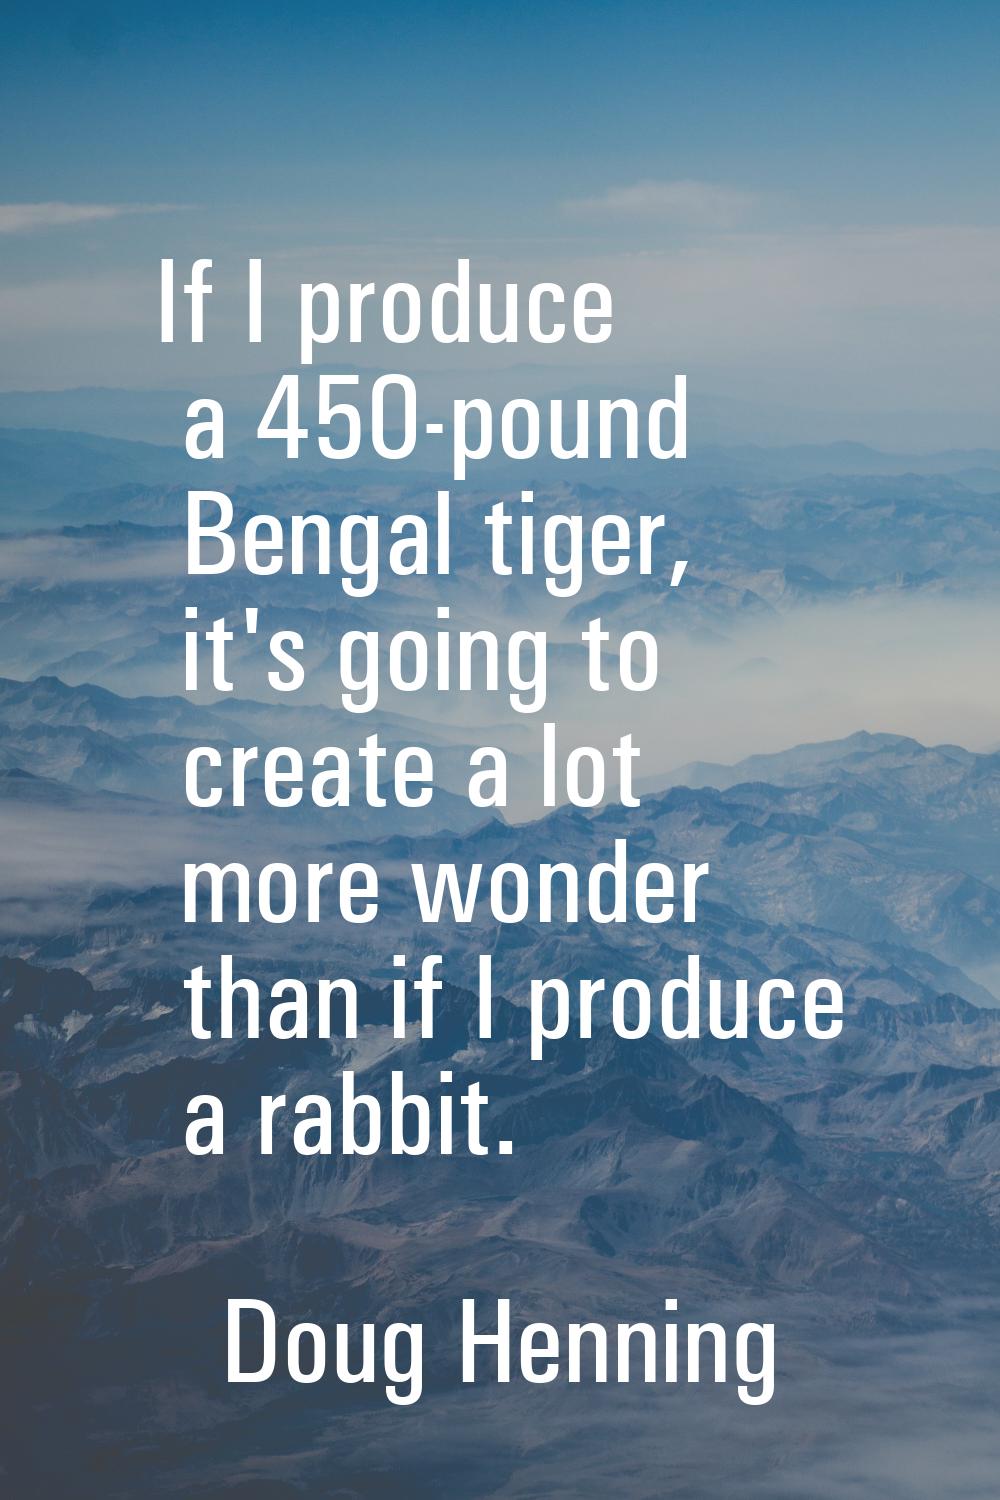 If I produce a 450-pound Bengal tiger, it's going to create a lot more wonder than if I produce a r